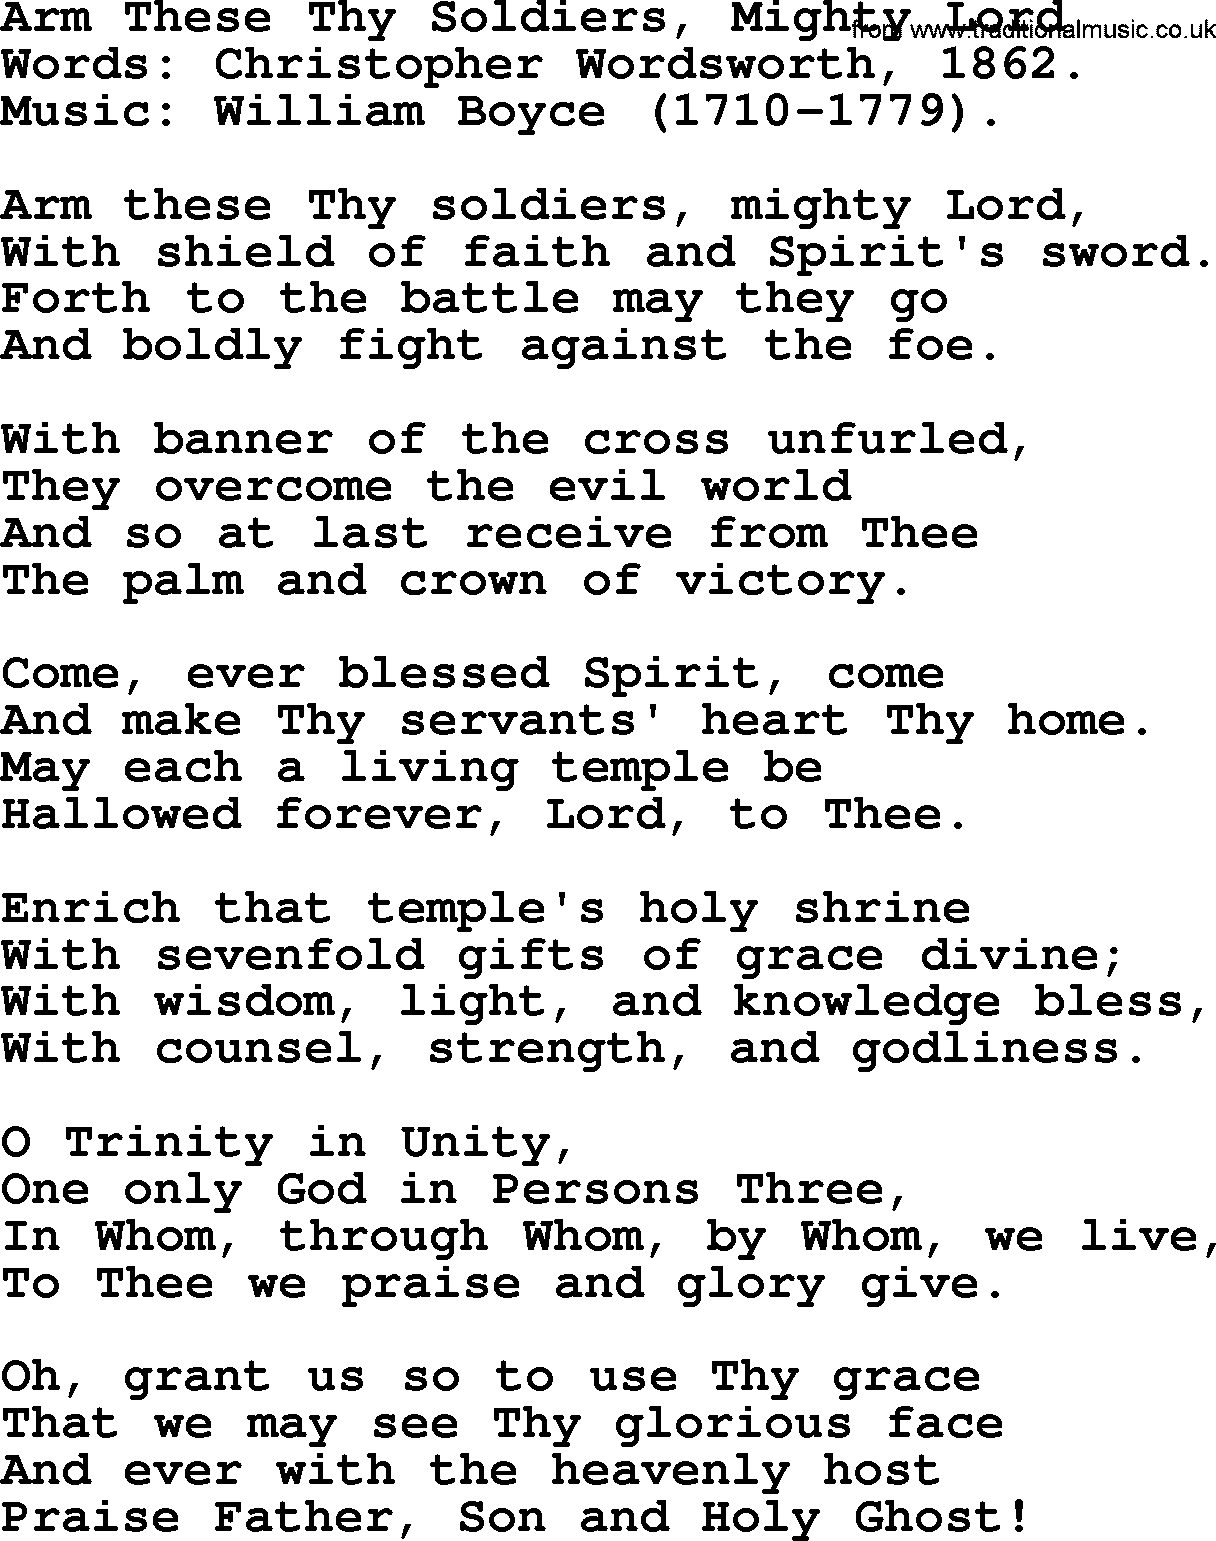 Hymns from the Psalms, Hymn: Arm These Thy Soldiers, Mighty Lord, lyrics with PDF